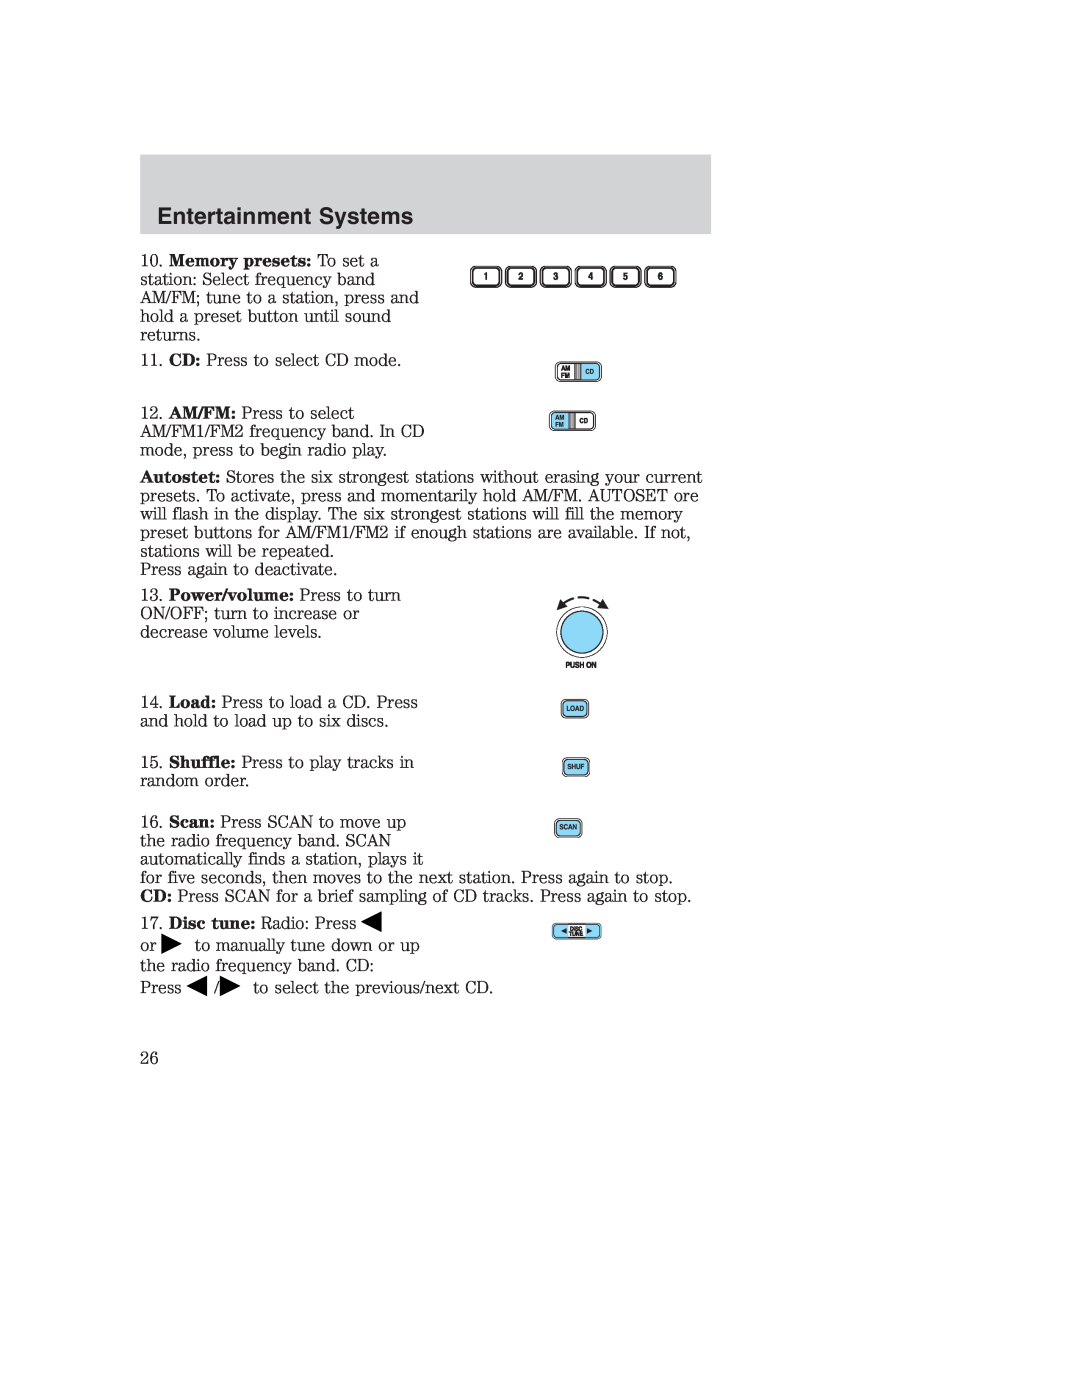 Ford AM/FM stereo manual Memory presets To set a, Entertainment Systems, CD Press to select CD mode 